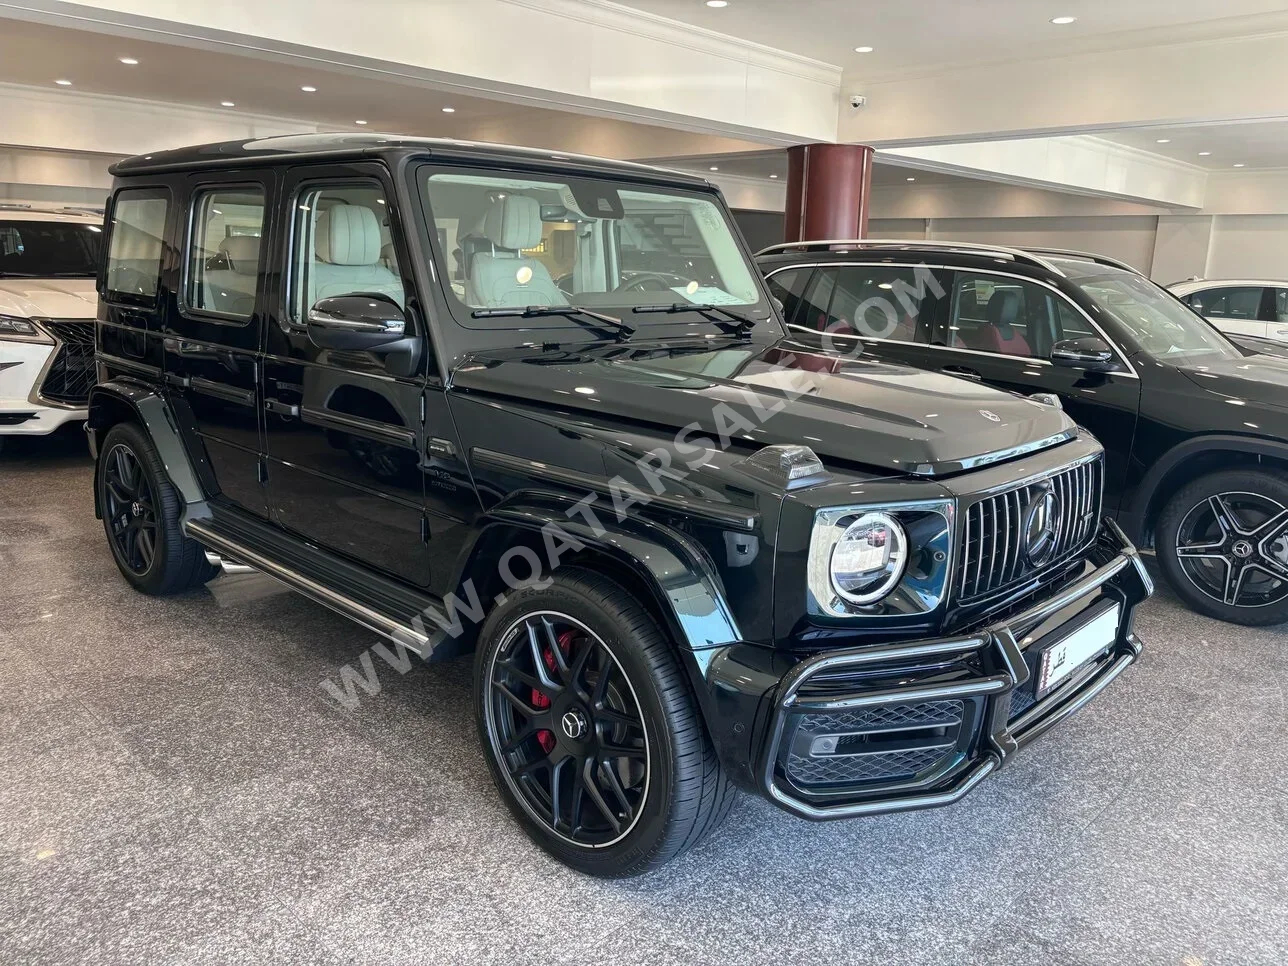 Mercedes-Benz  G-Class  63 AMG  2023  Automatic  3,300 Km  8 Cylinder  Four Wheel Drive (4WD)  SUV  Green  With Warranty